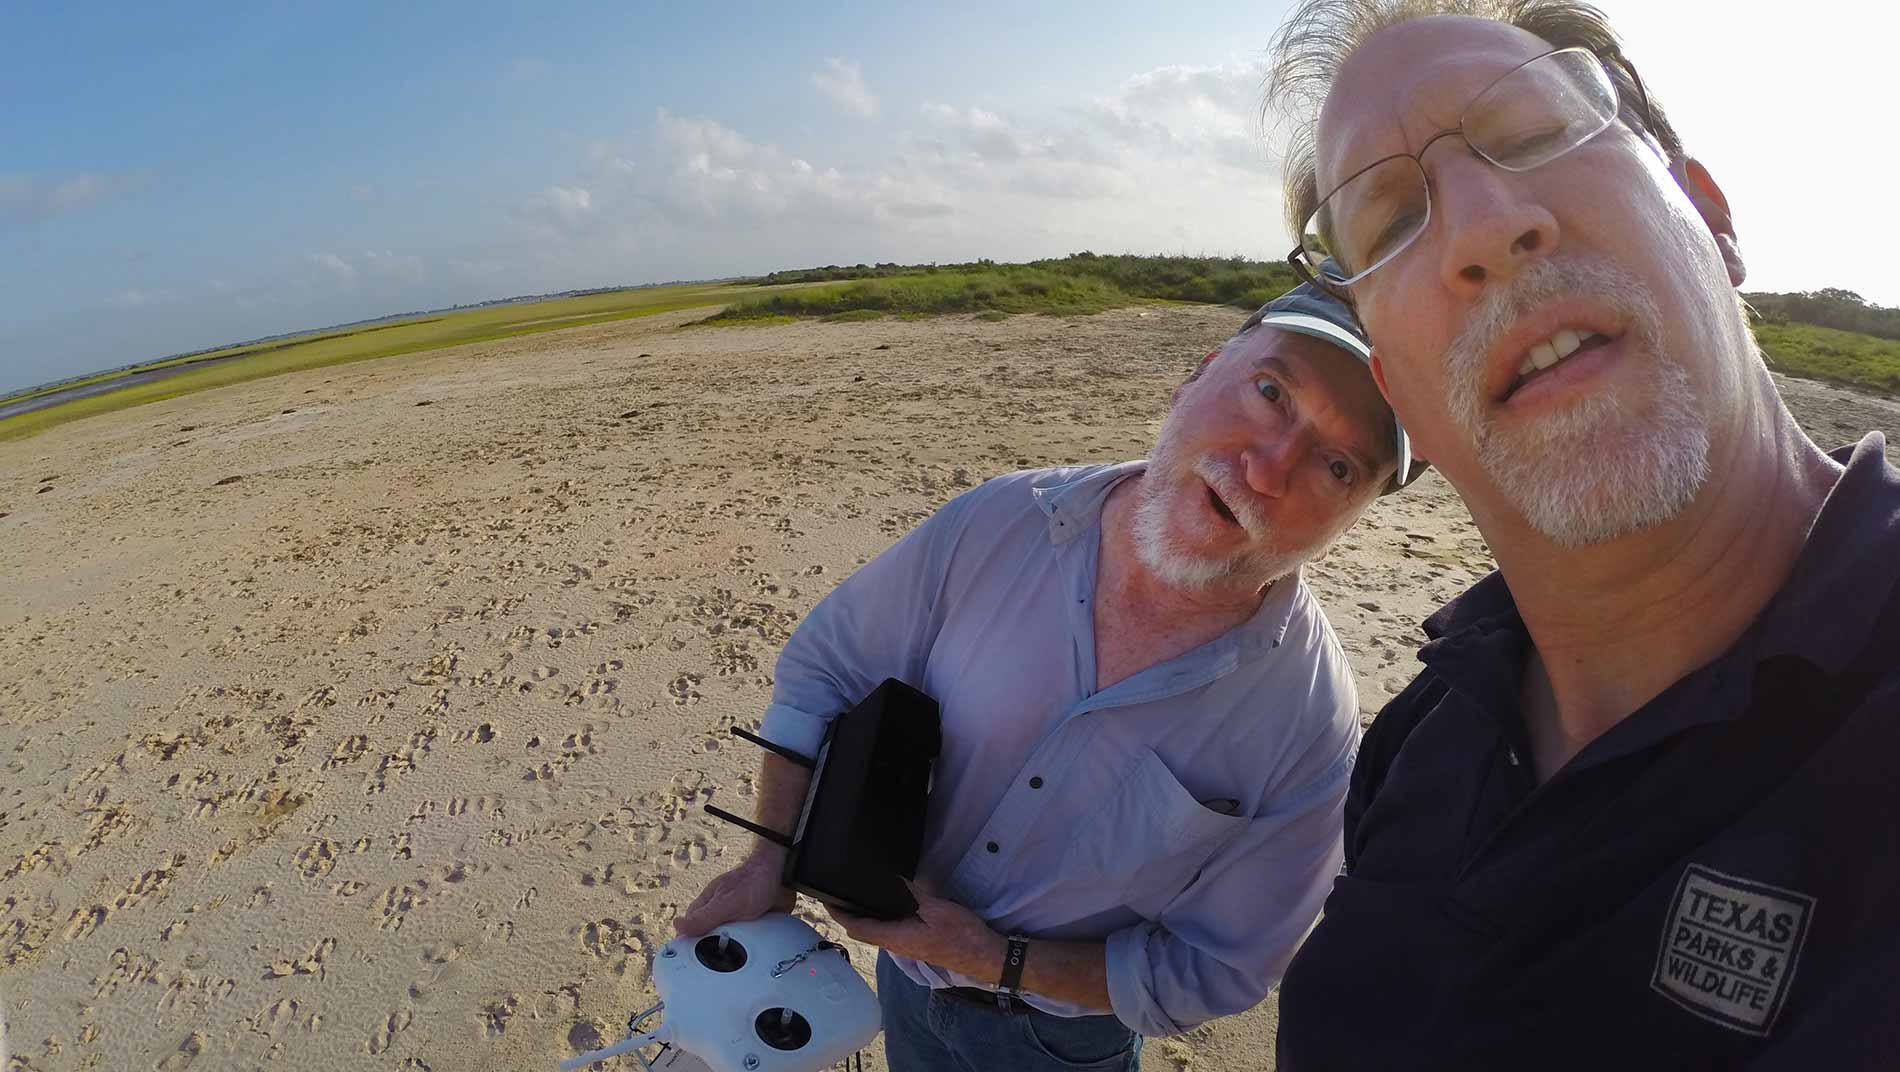 Earl Nottingham and Bruce Biermann get their GoPro faces on while shooting some aerials at Powderhorn Ranch.